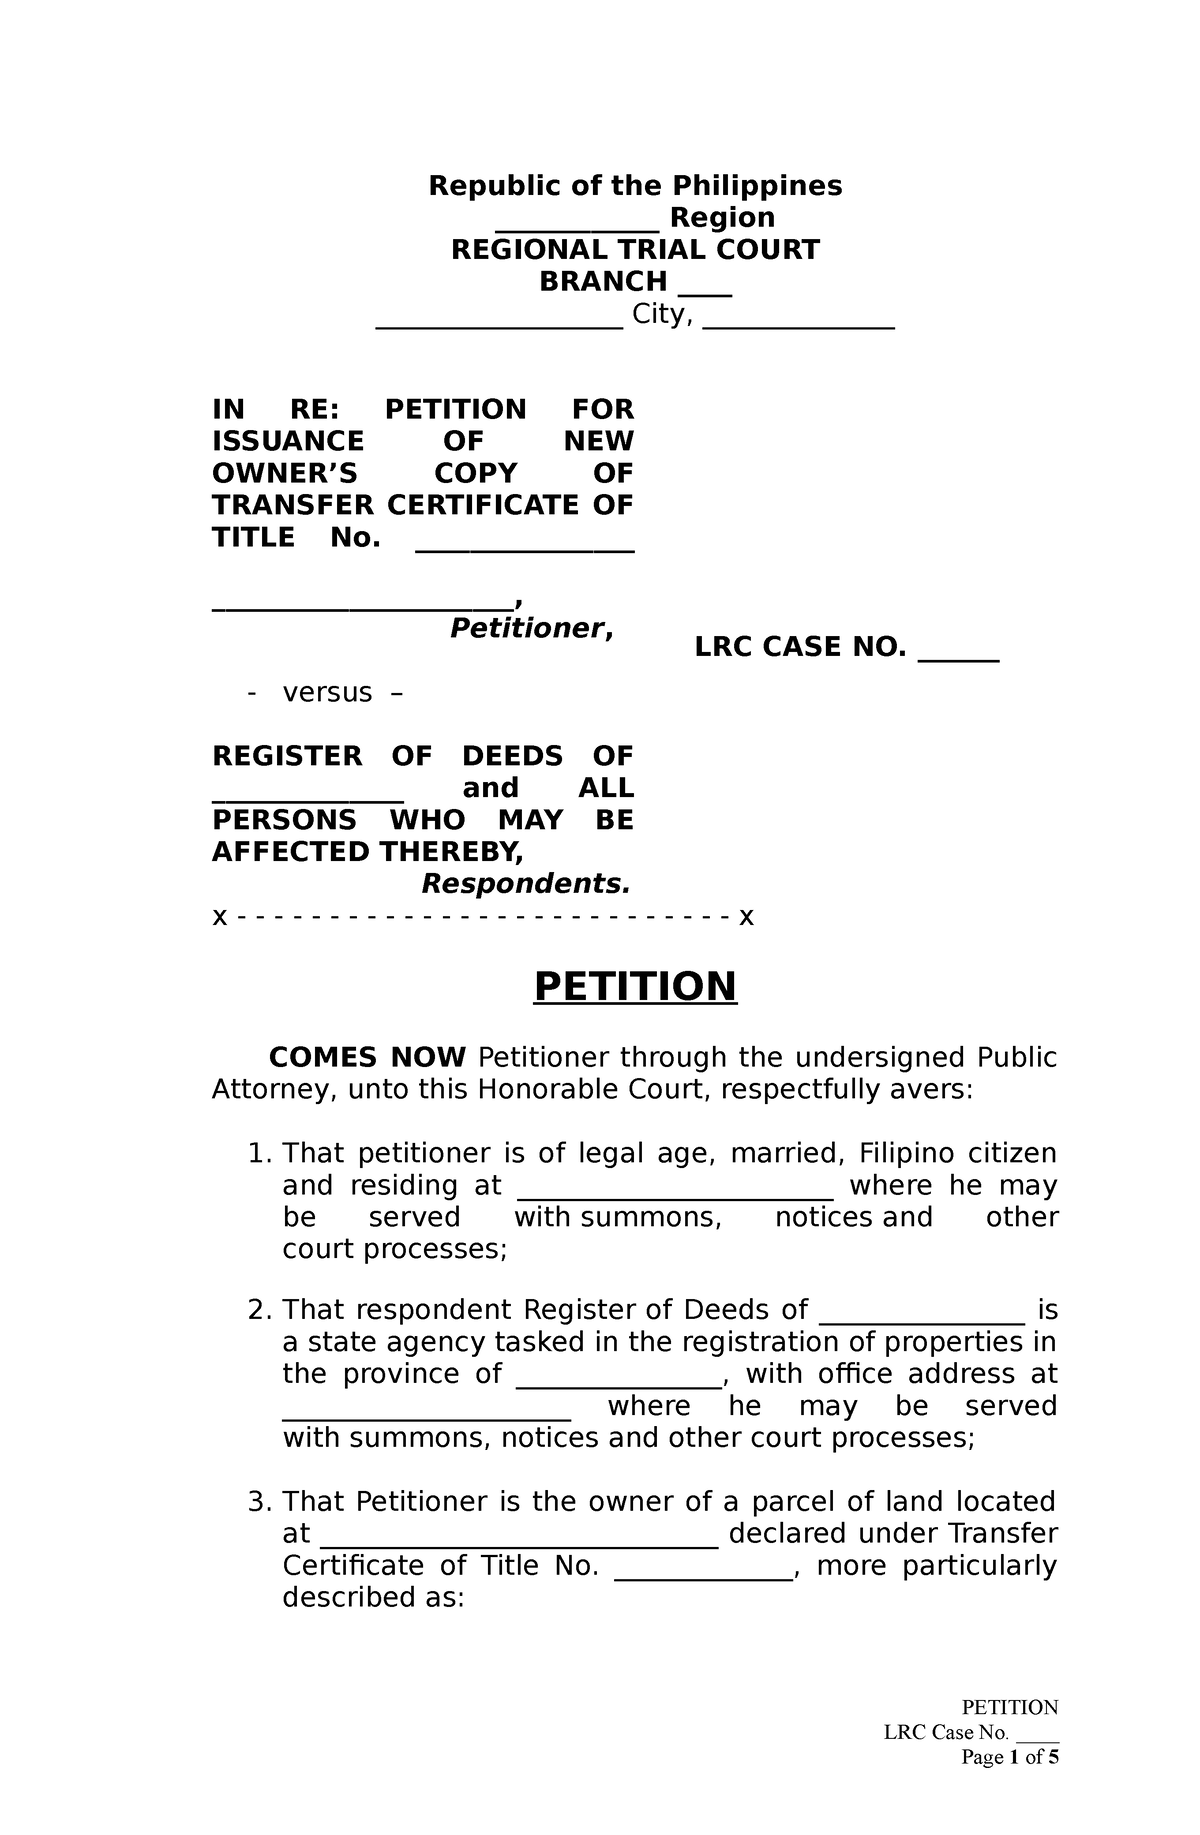 petition-for-issuance-of-new-owner-s-copy-of-transfer-certificate-of